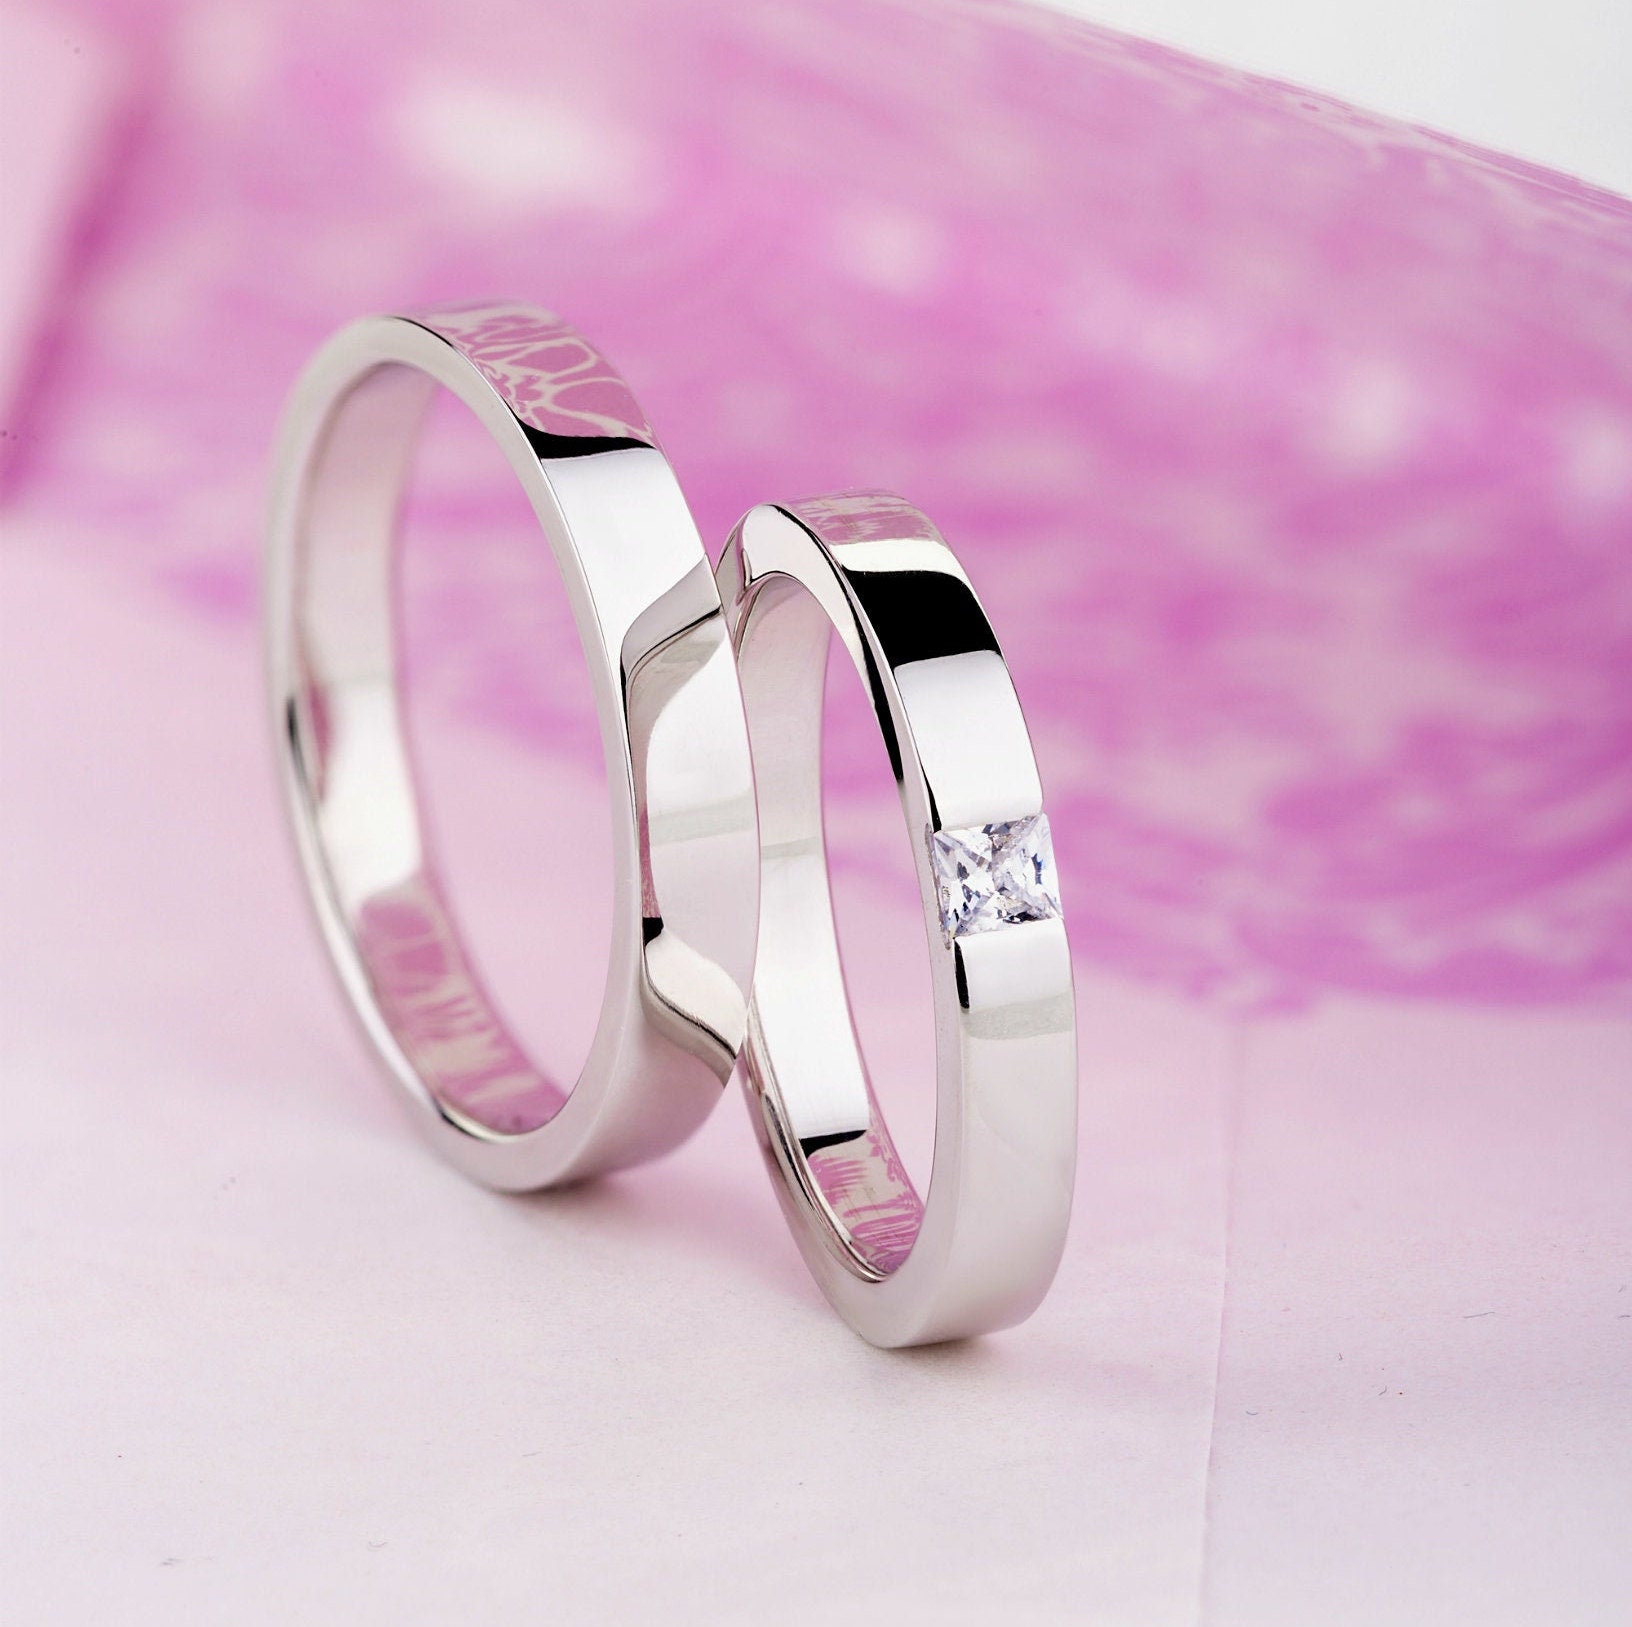 Simple White Gold Wedding Bands With Diamond. His and Hers - Etsy